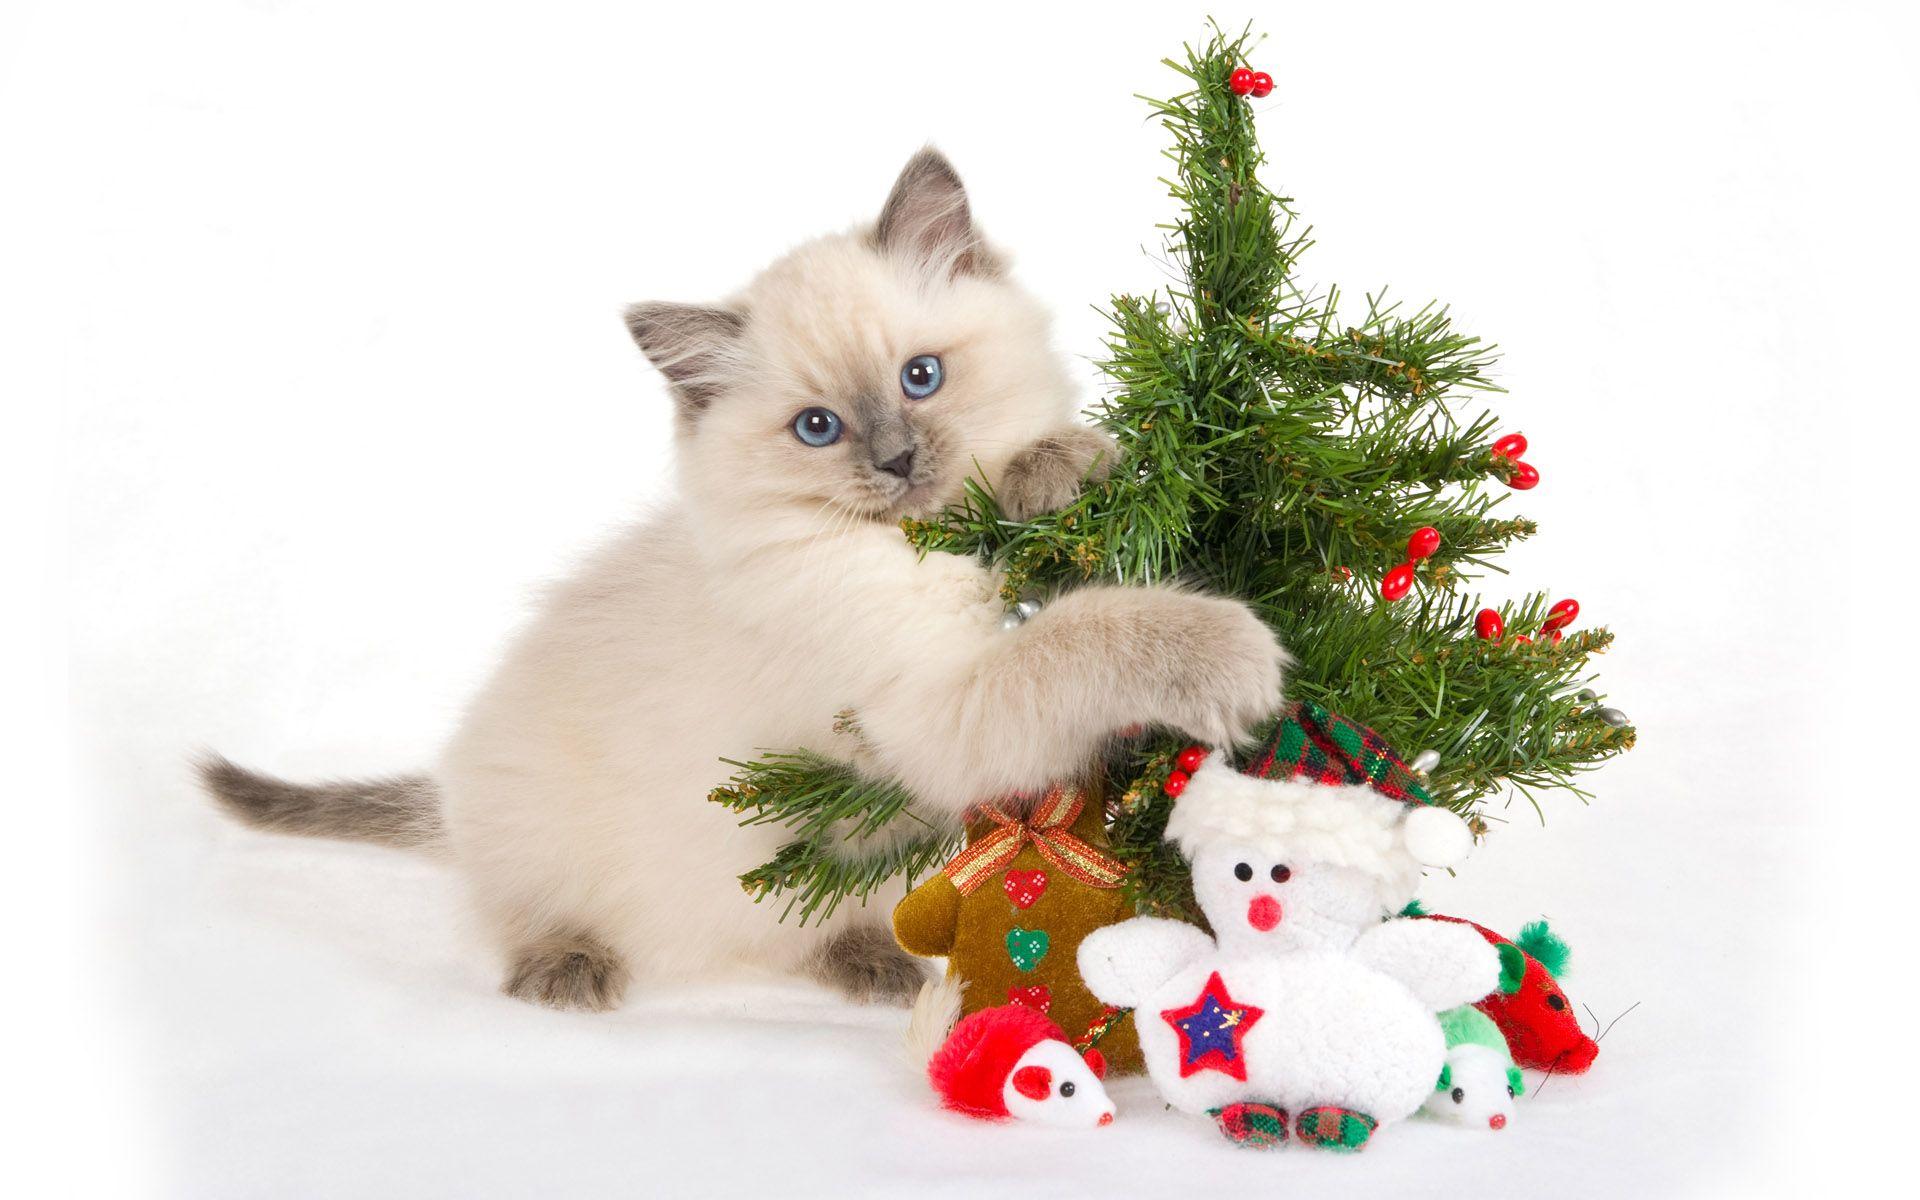 Cat with Christmas tree wallpaper. Cat with Christmas tree